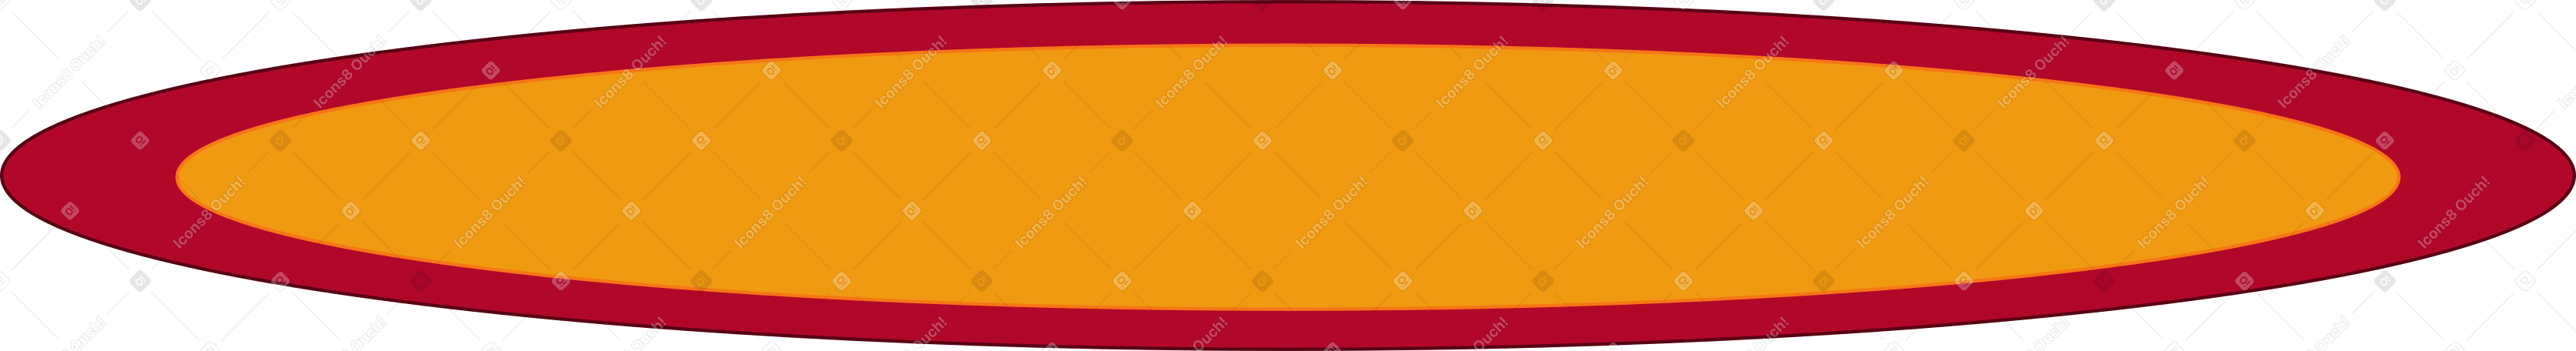 Tapete pequeno PNG, SVG